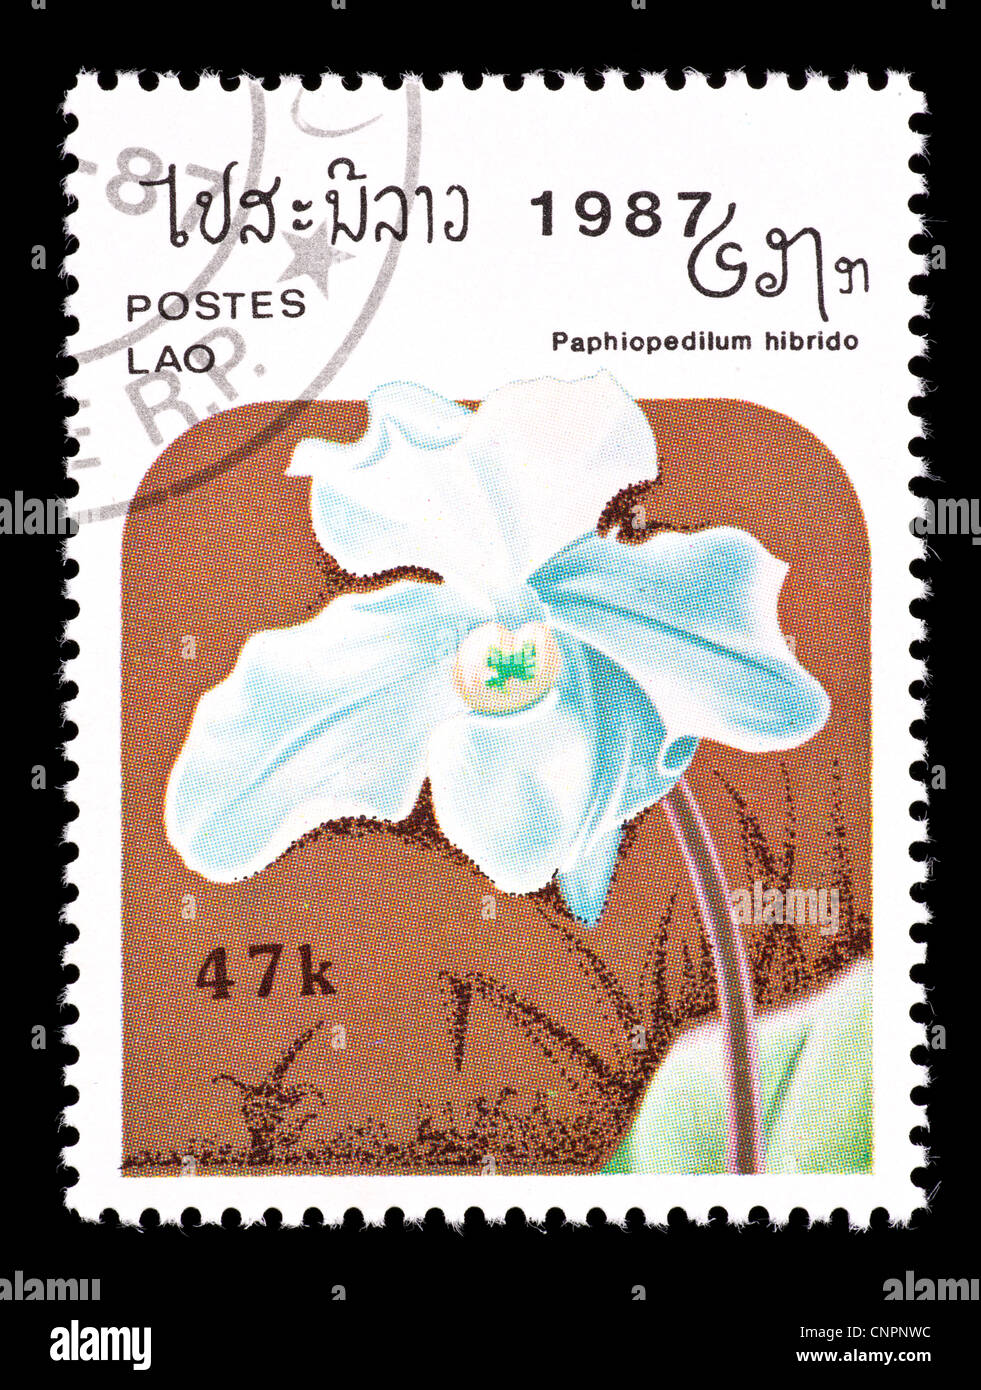 Postage stamp from Laos depicting an exotic hybrid orchid (Paphiopedilum hybrid) Stock Photo